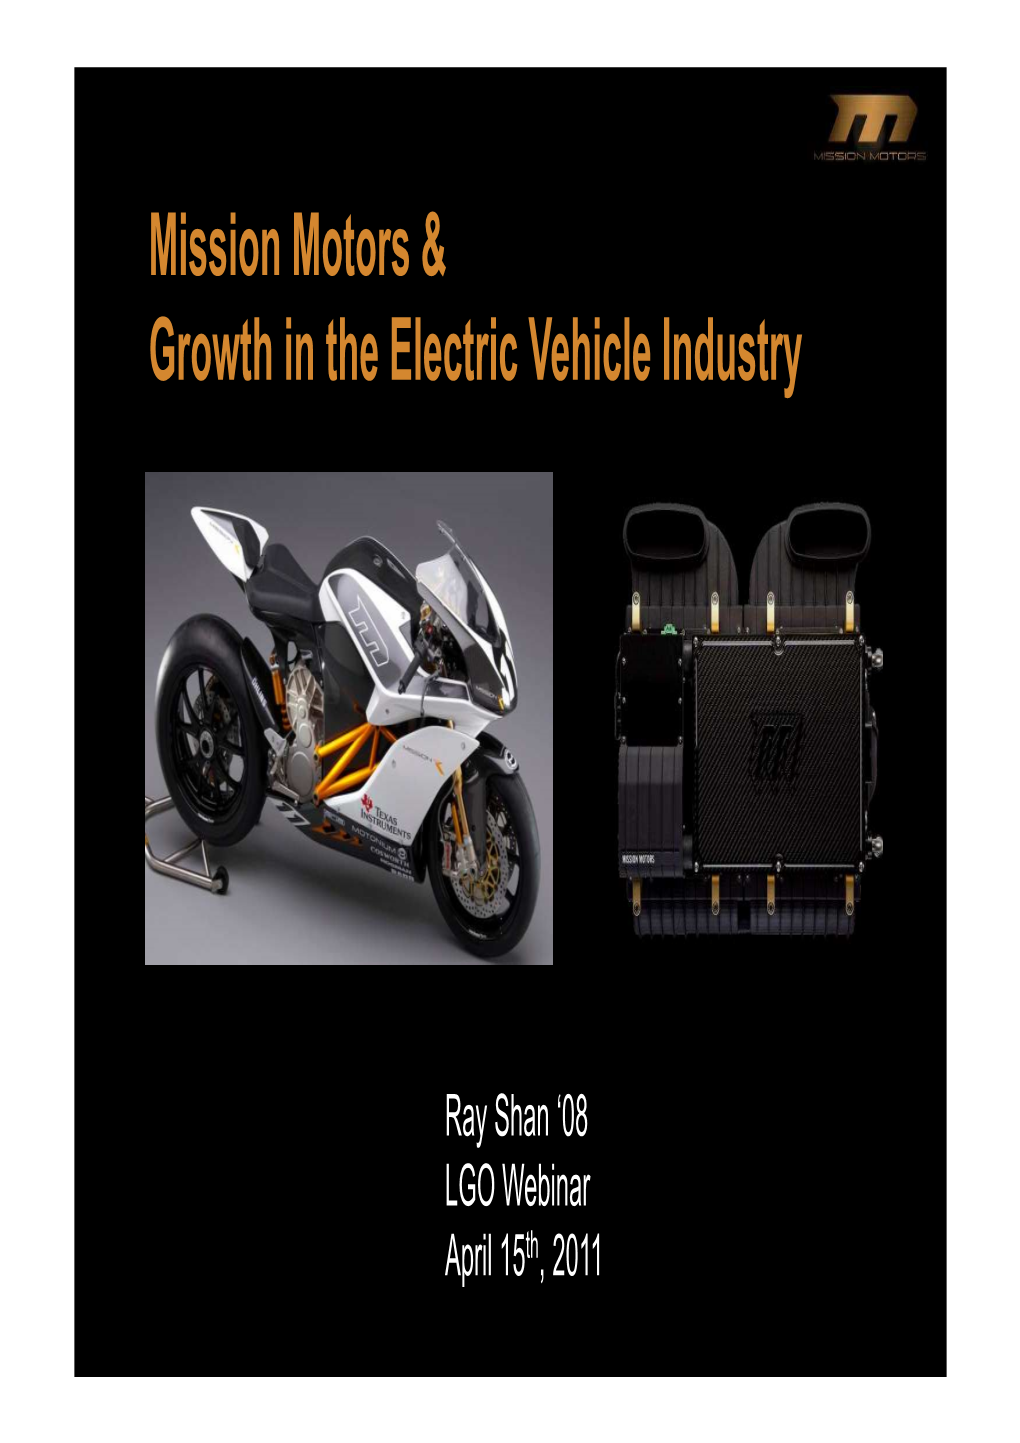 Mission Motors & Growth in the Electric Vehicle Industry